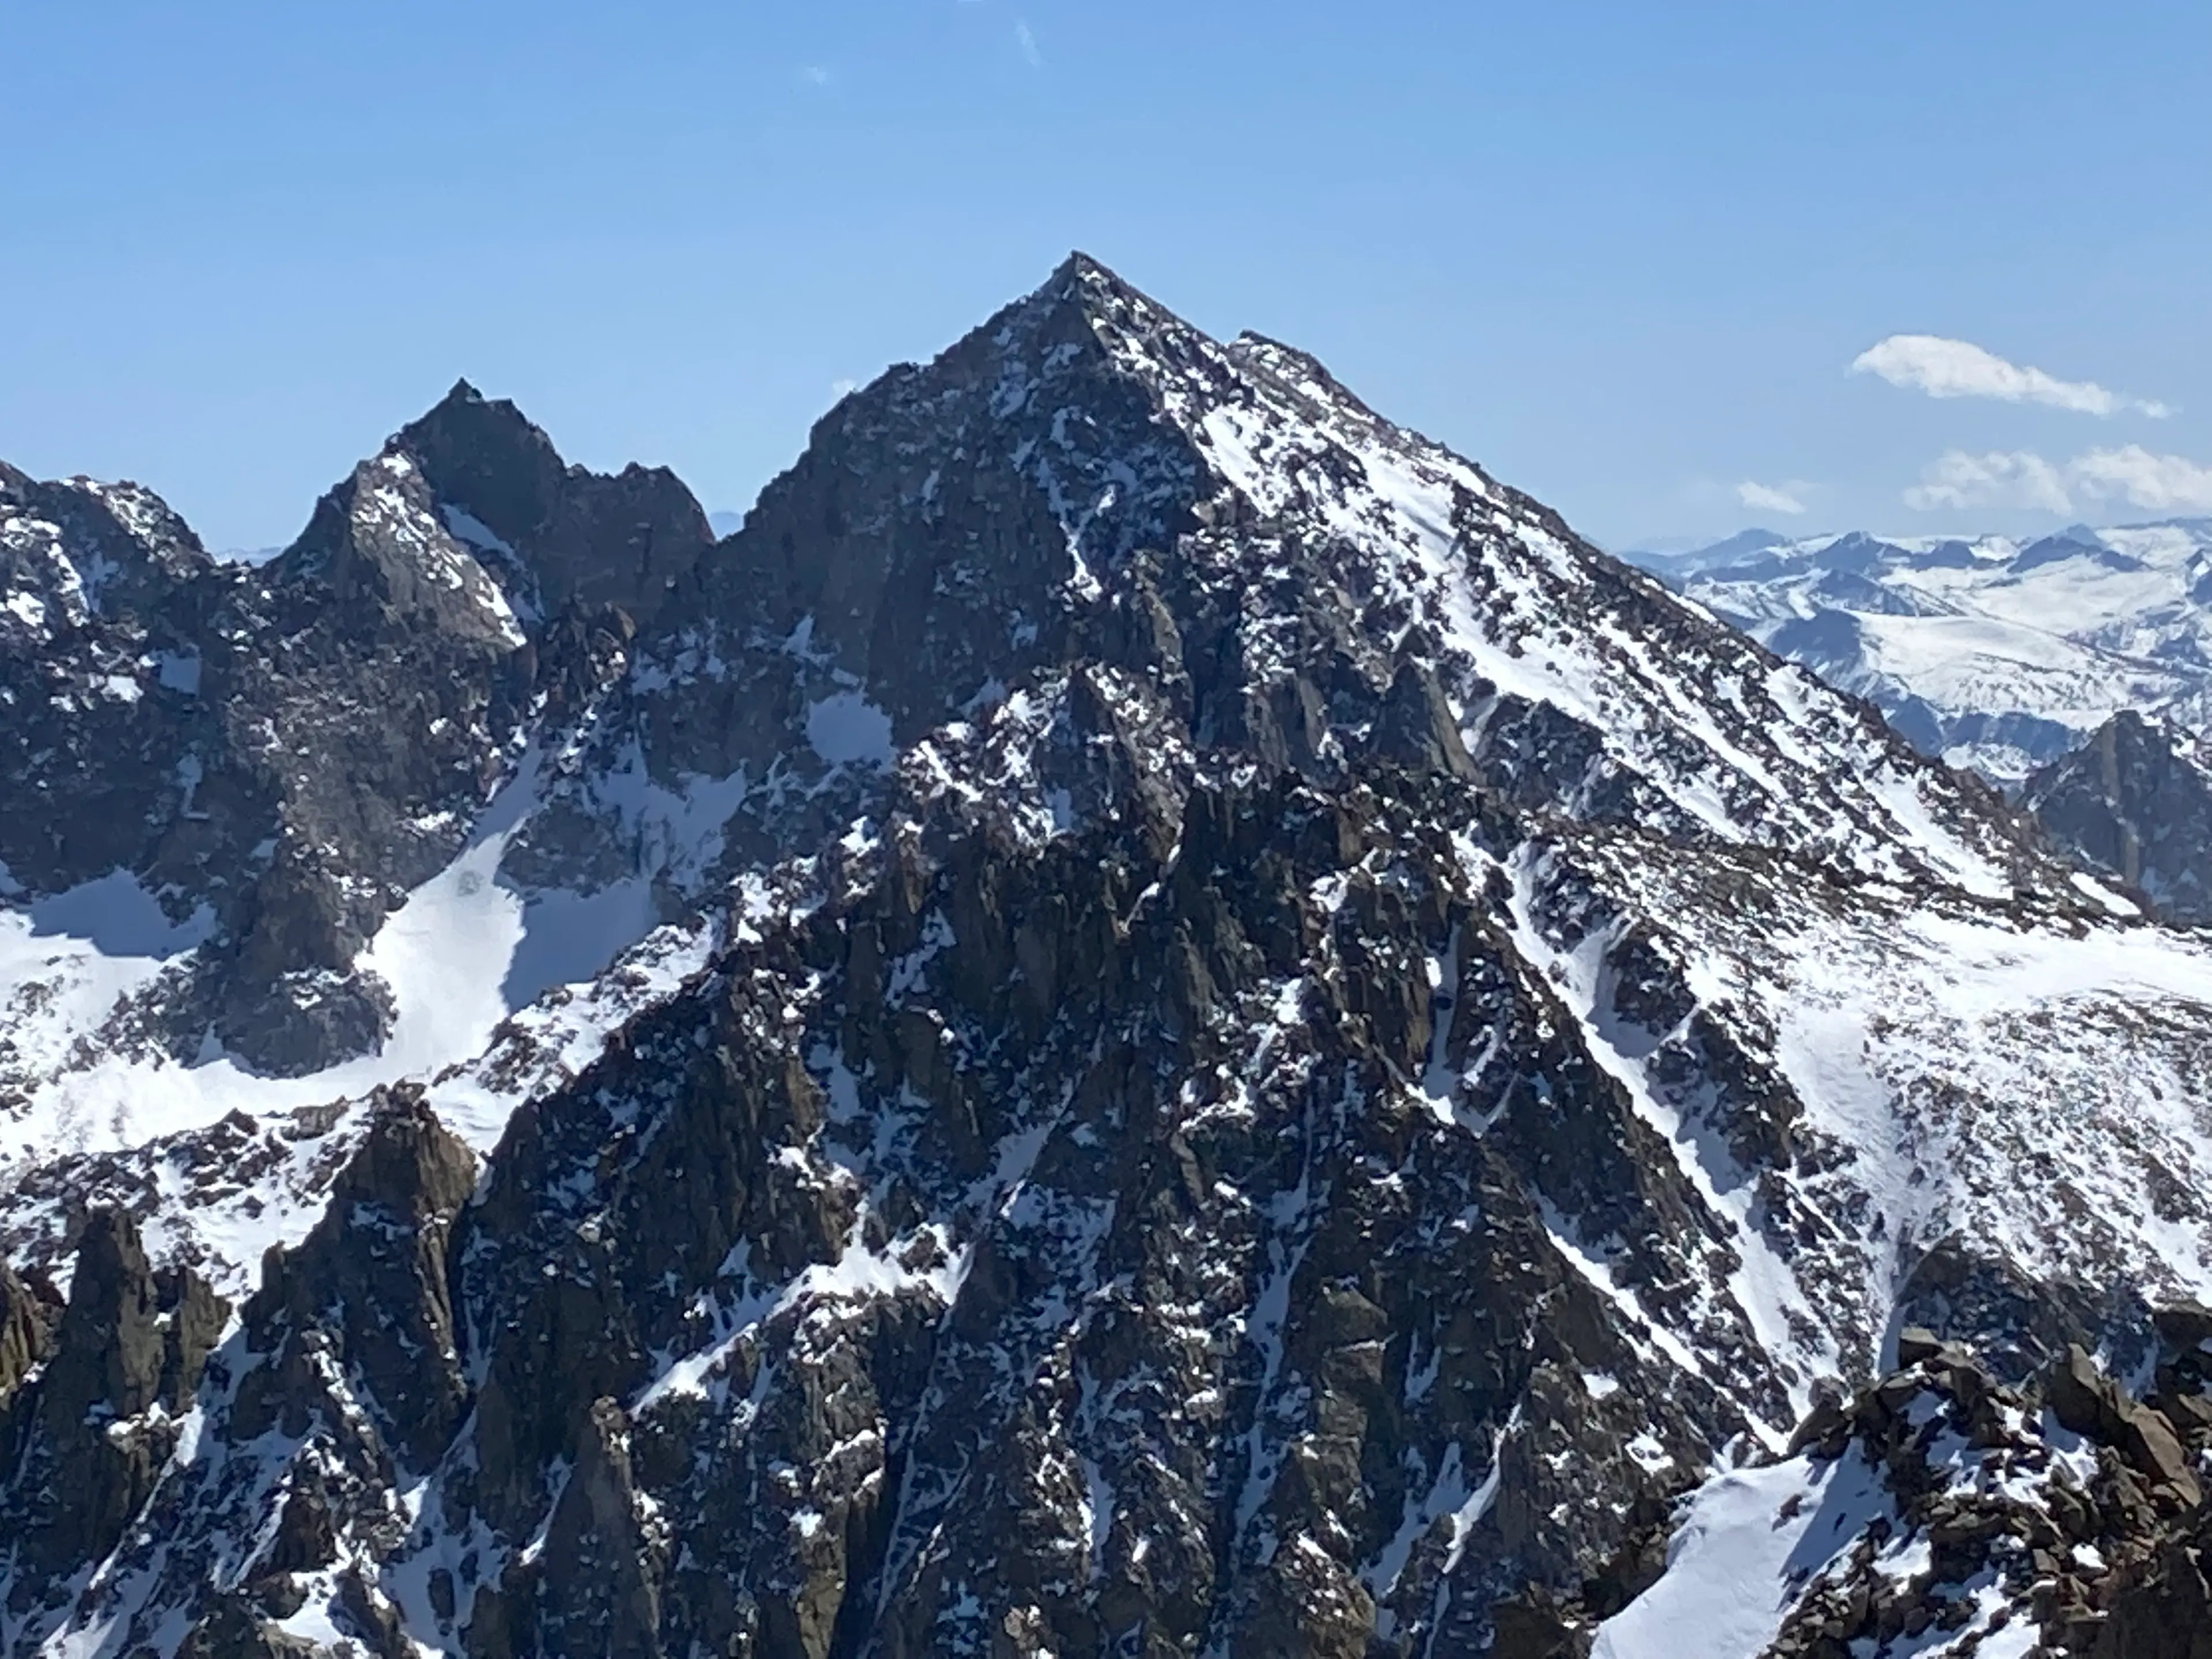 Mount Agassiz (R) and Mount Winchell (L)